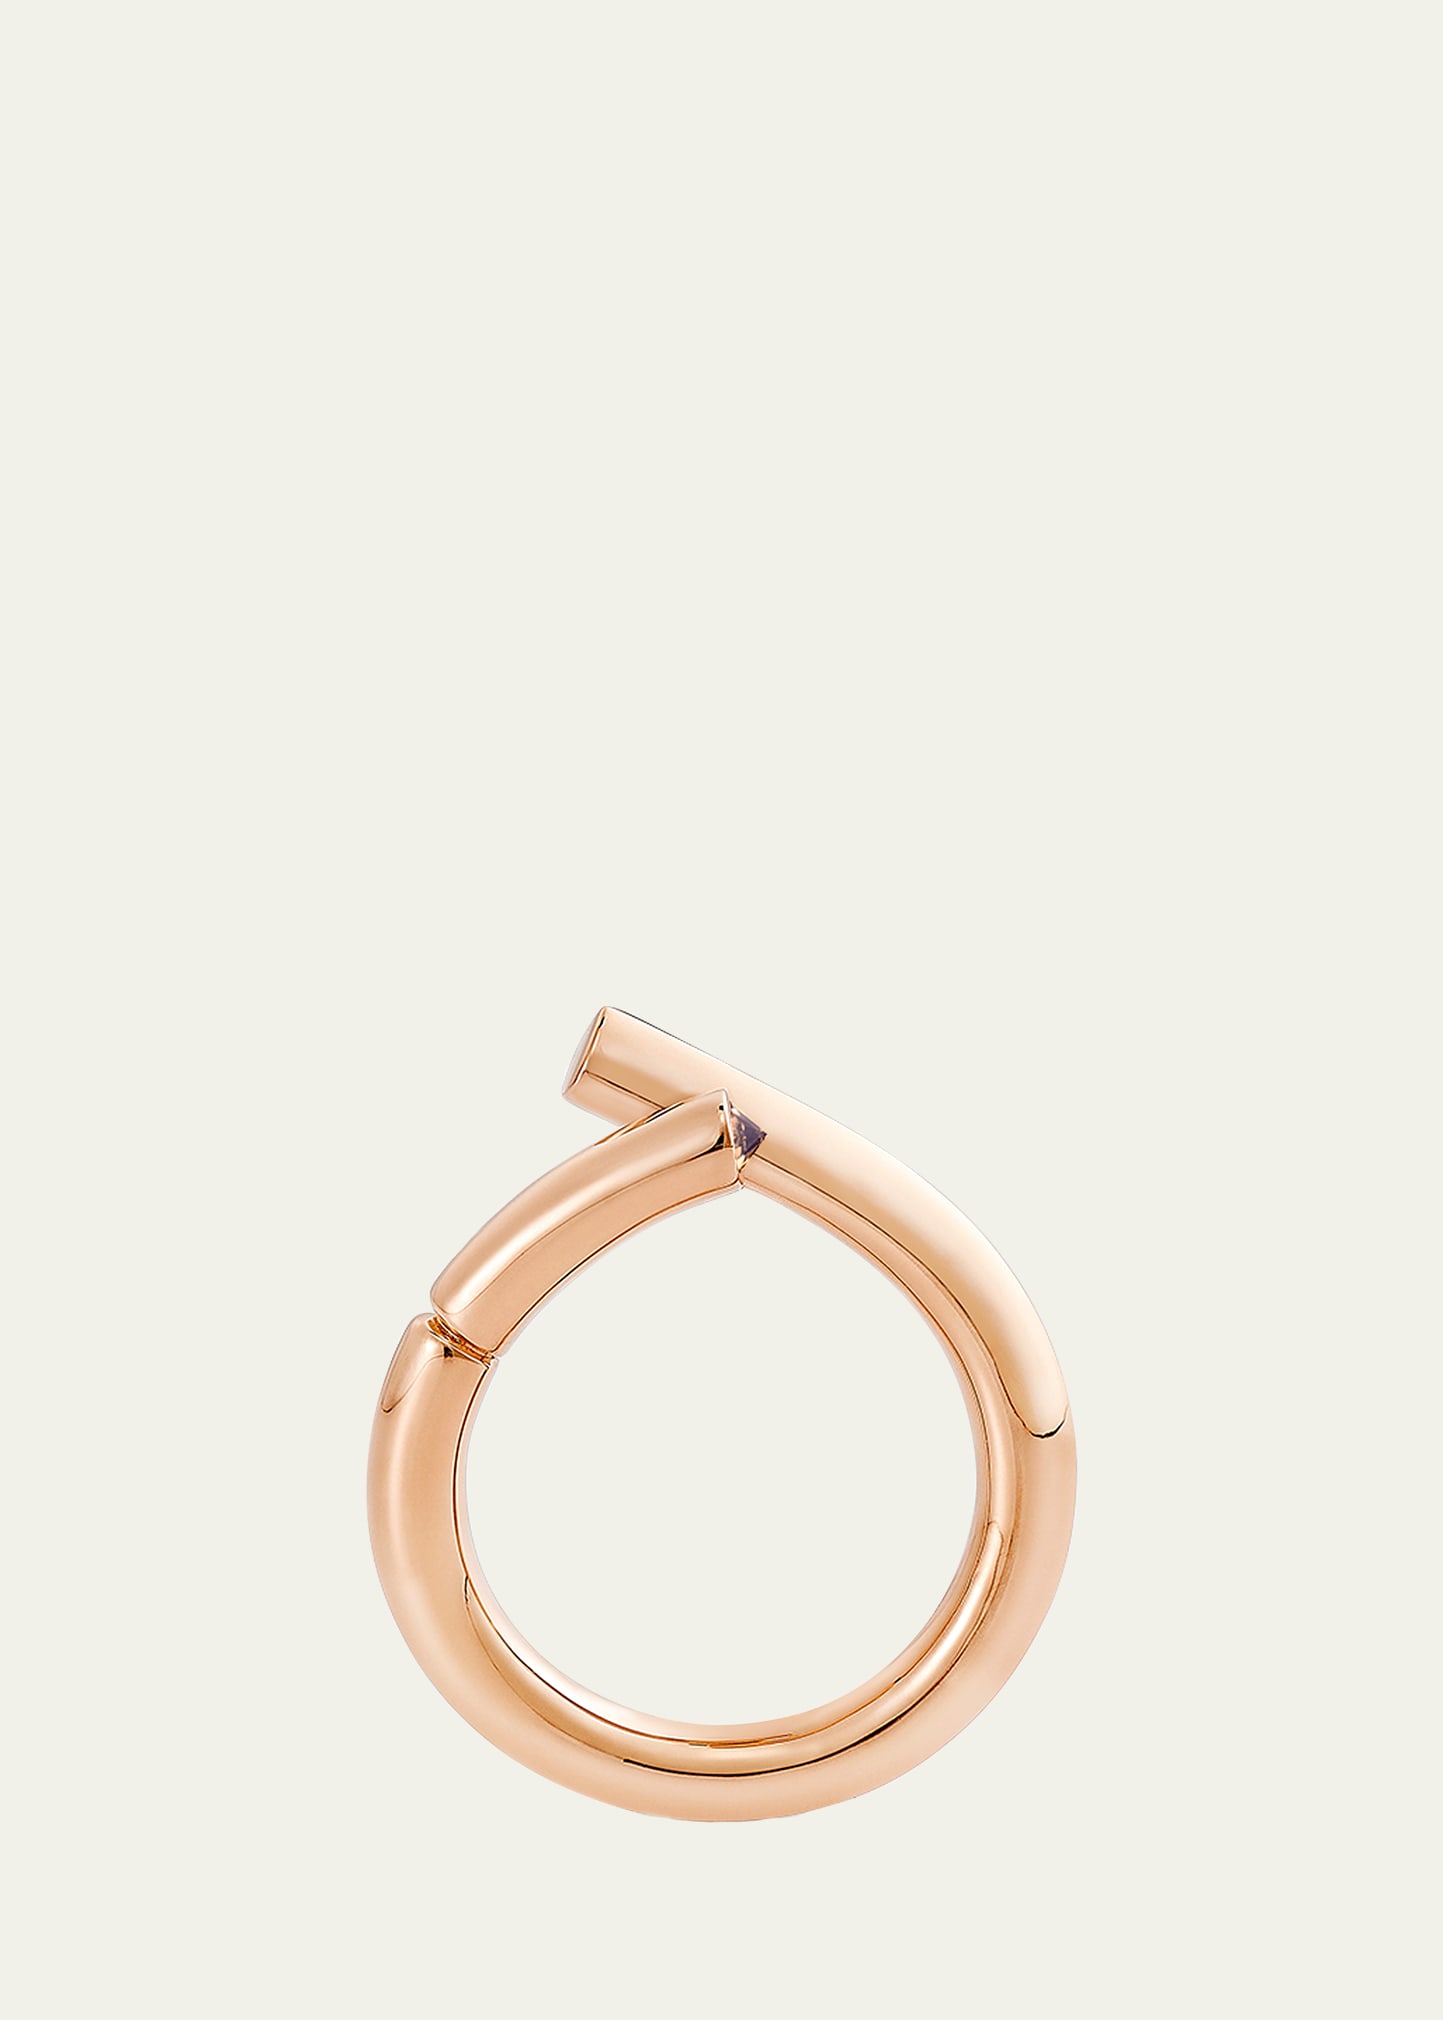 18k Fairmined Rose Gold Ring with Diamond, Size 53